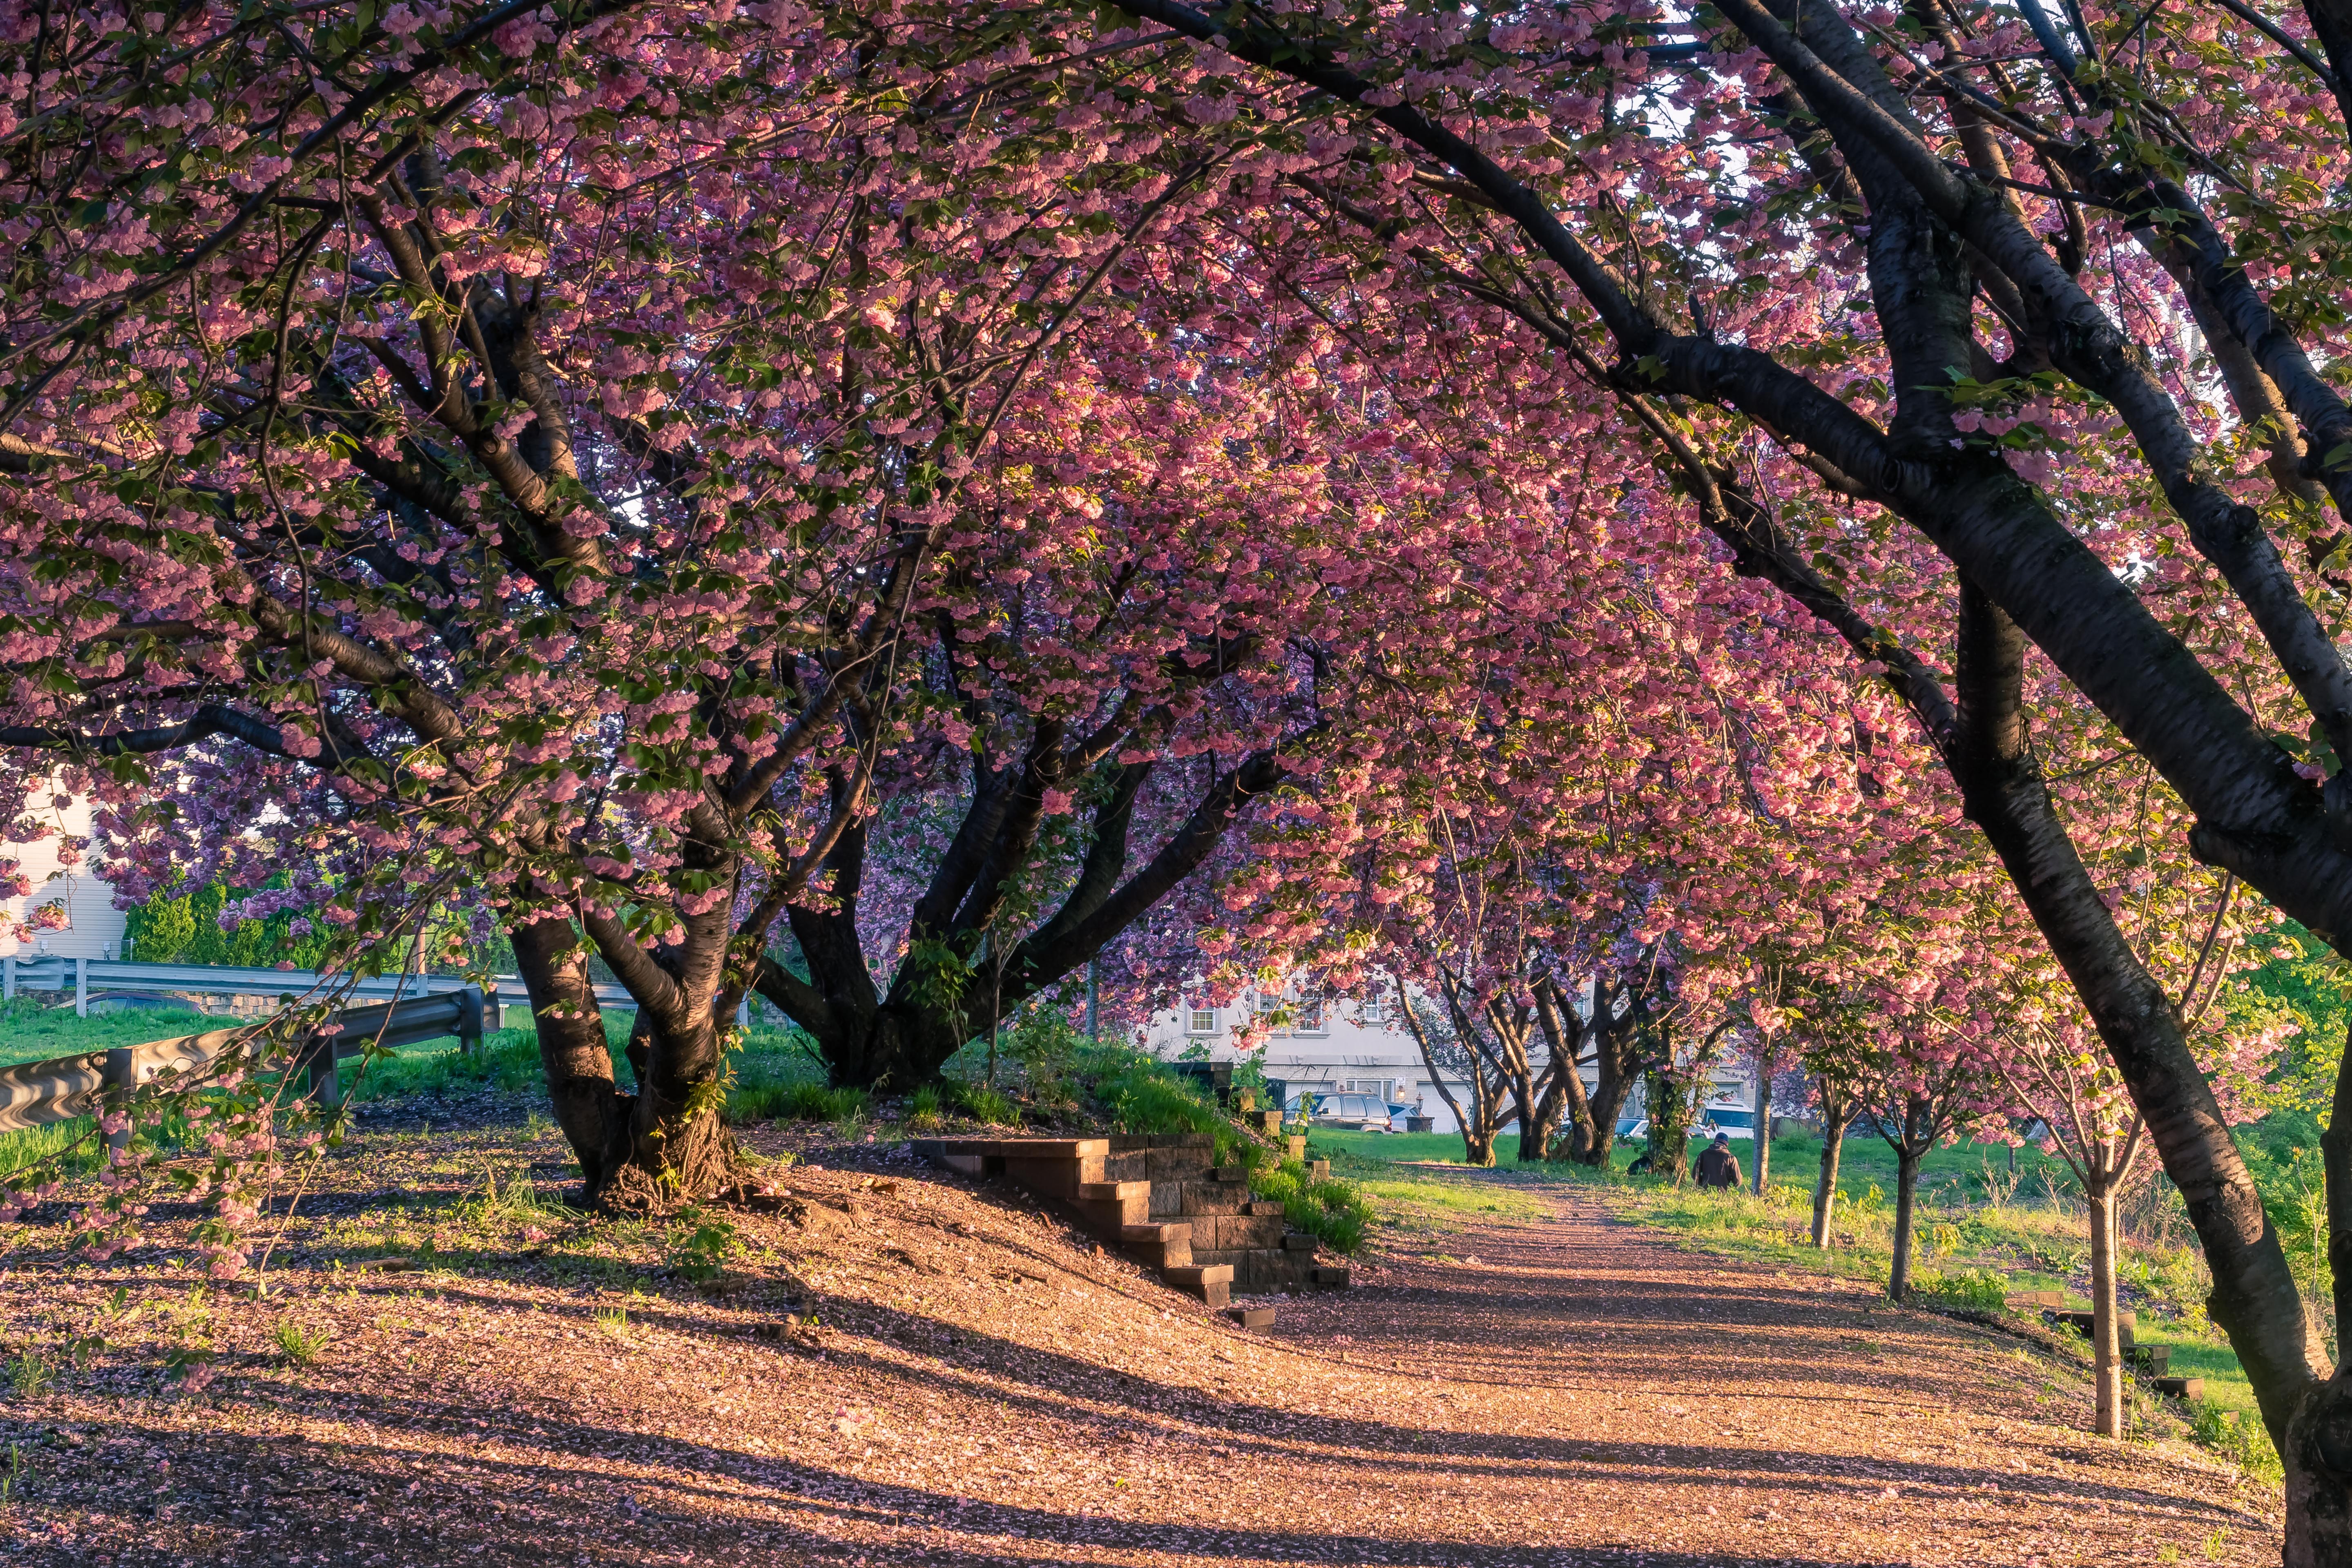 Walking path behind the falls, during sunset with cherry blossom trees in full bloom.